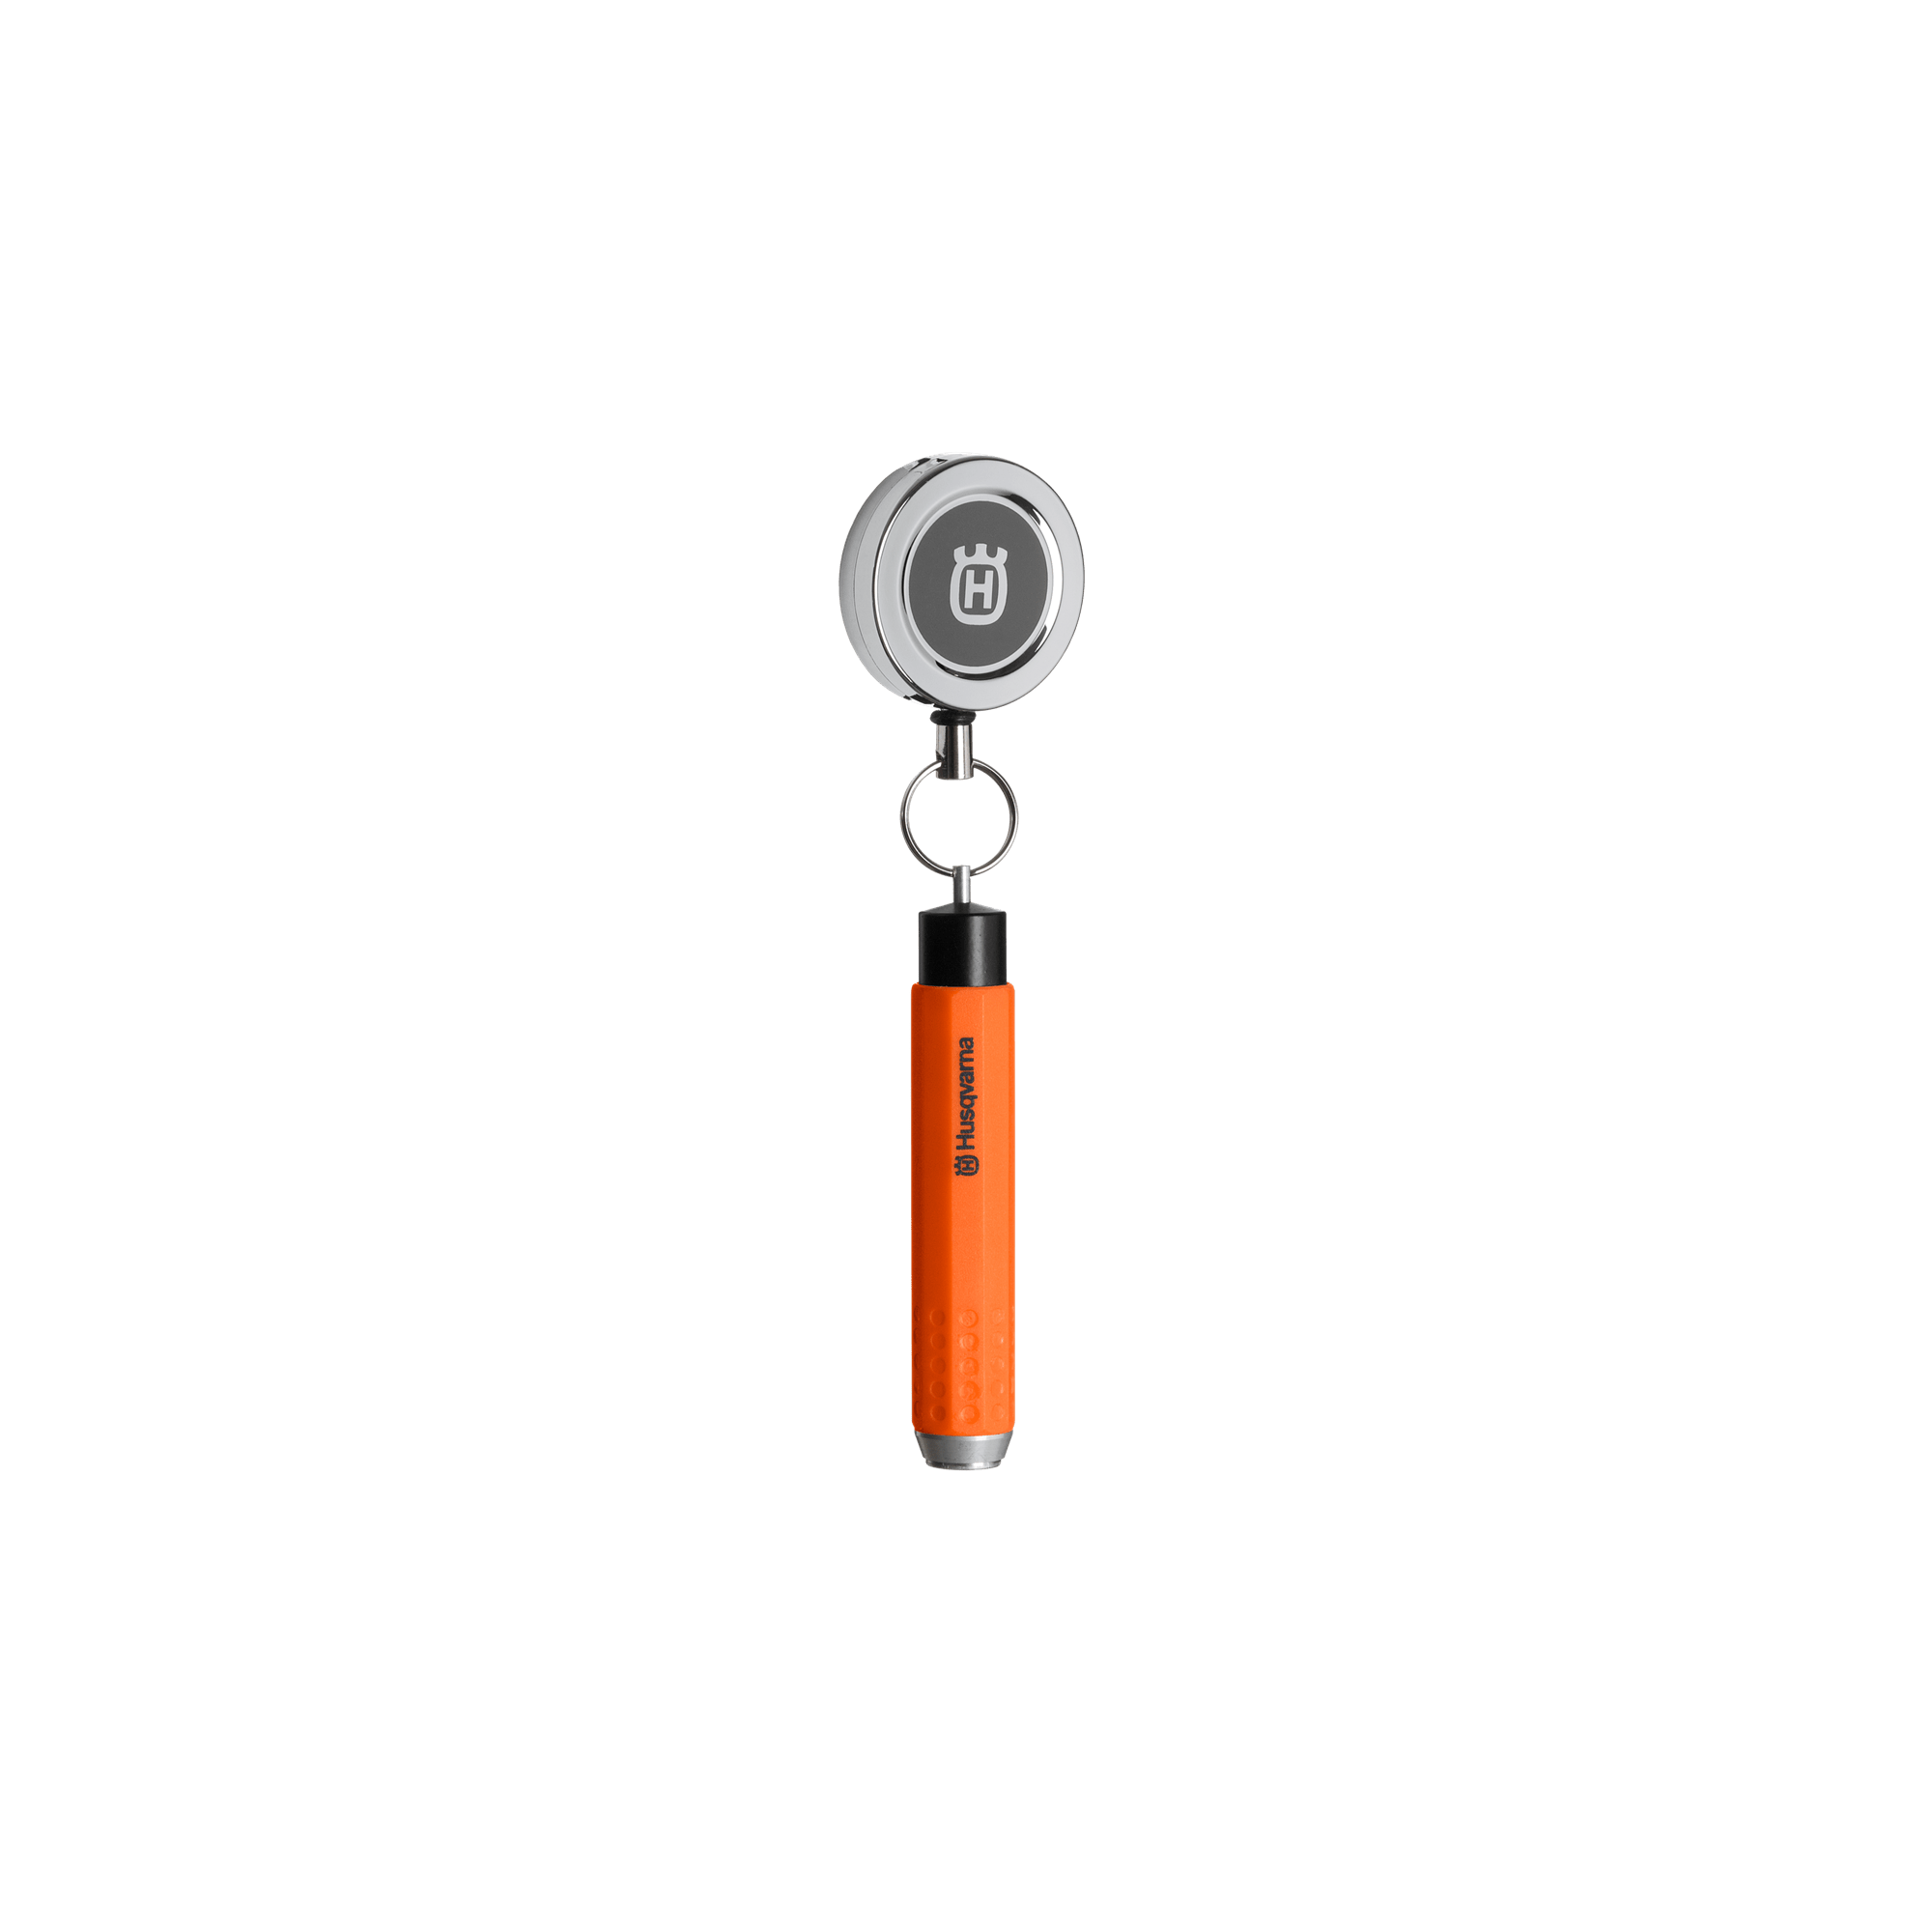 Image for Crayon holder with reel from HusqvarnaB2C